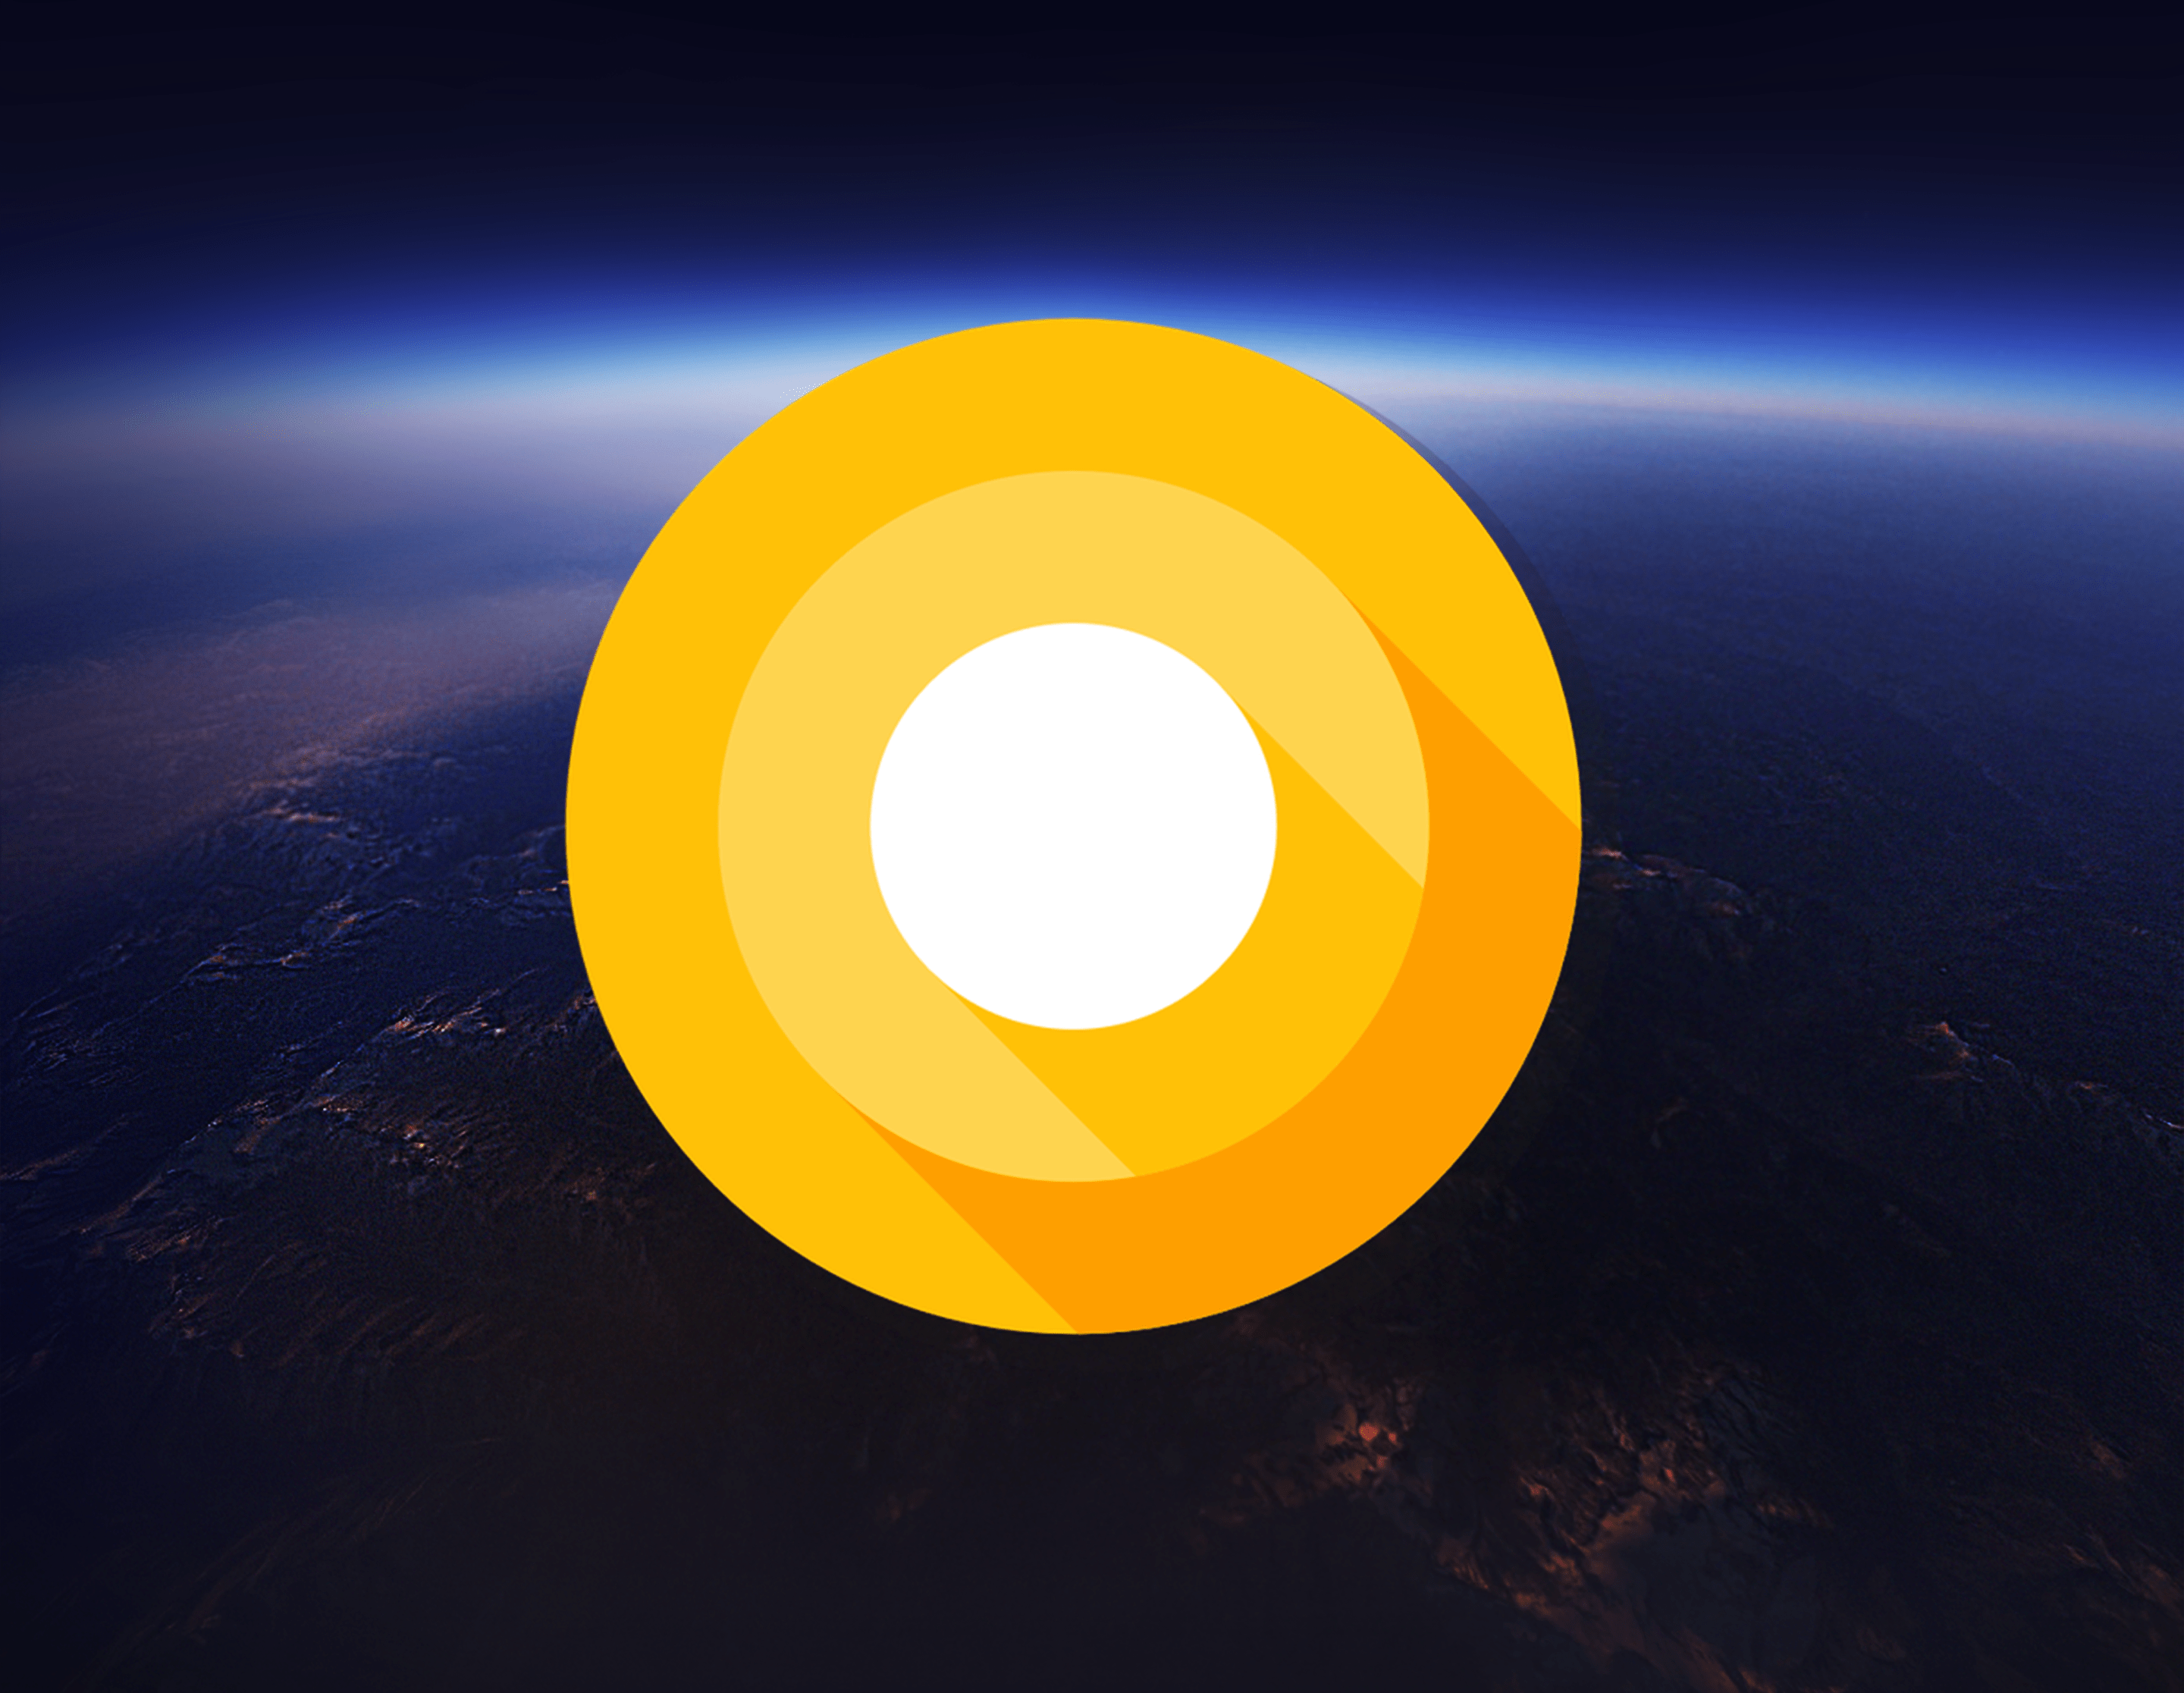 Android O makes its public debut this fall.